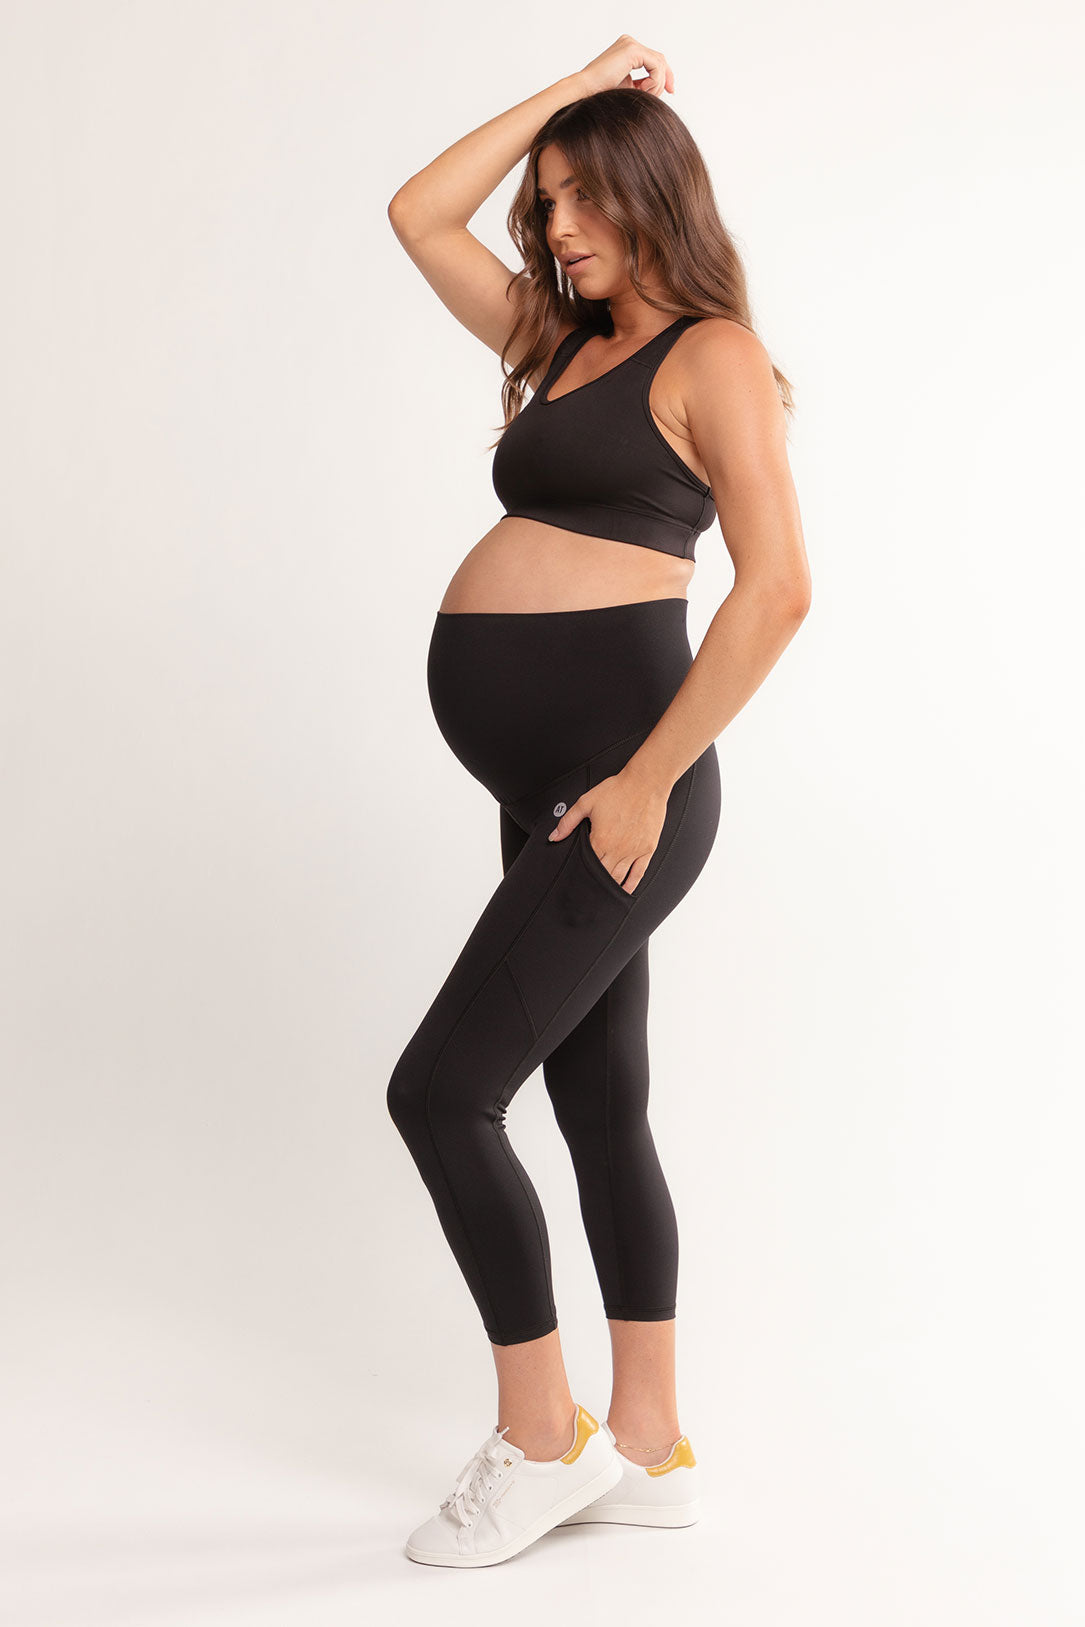 Belly band benefits Pros and cons of maternity support products